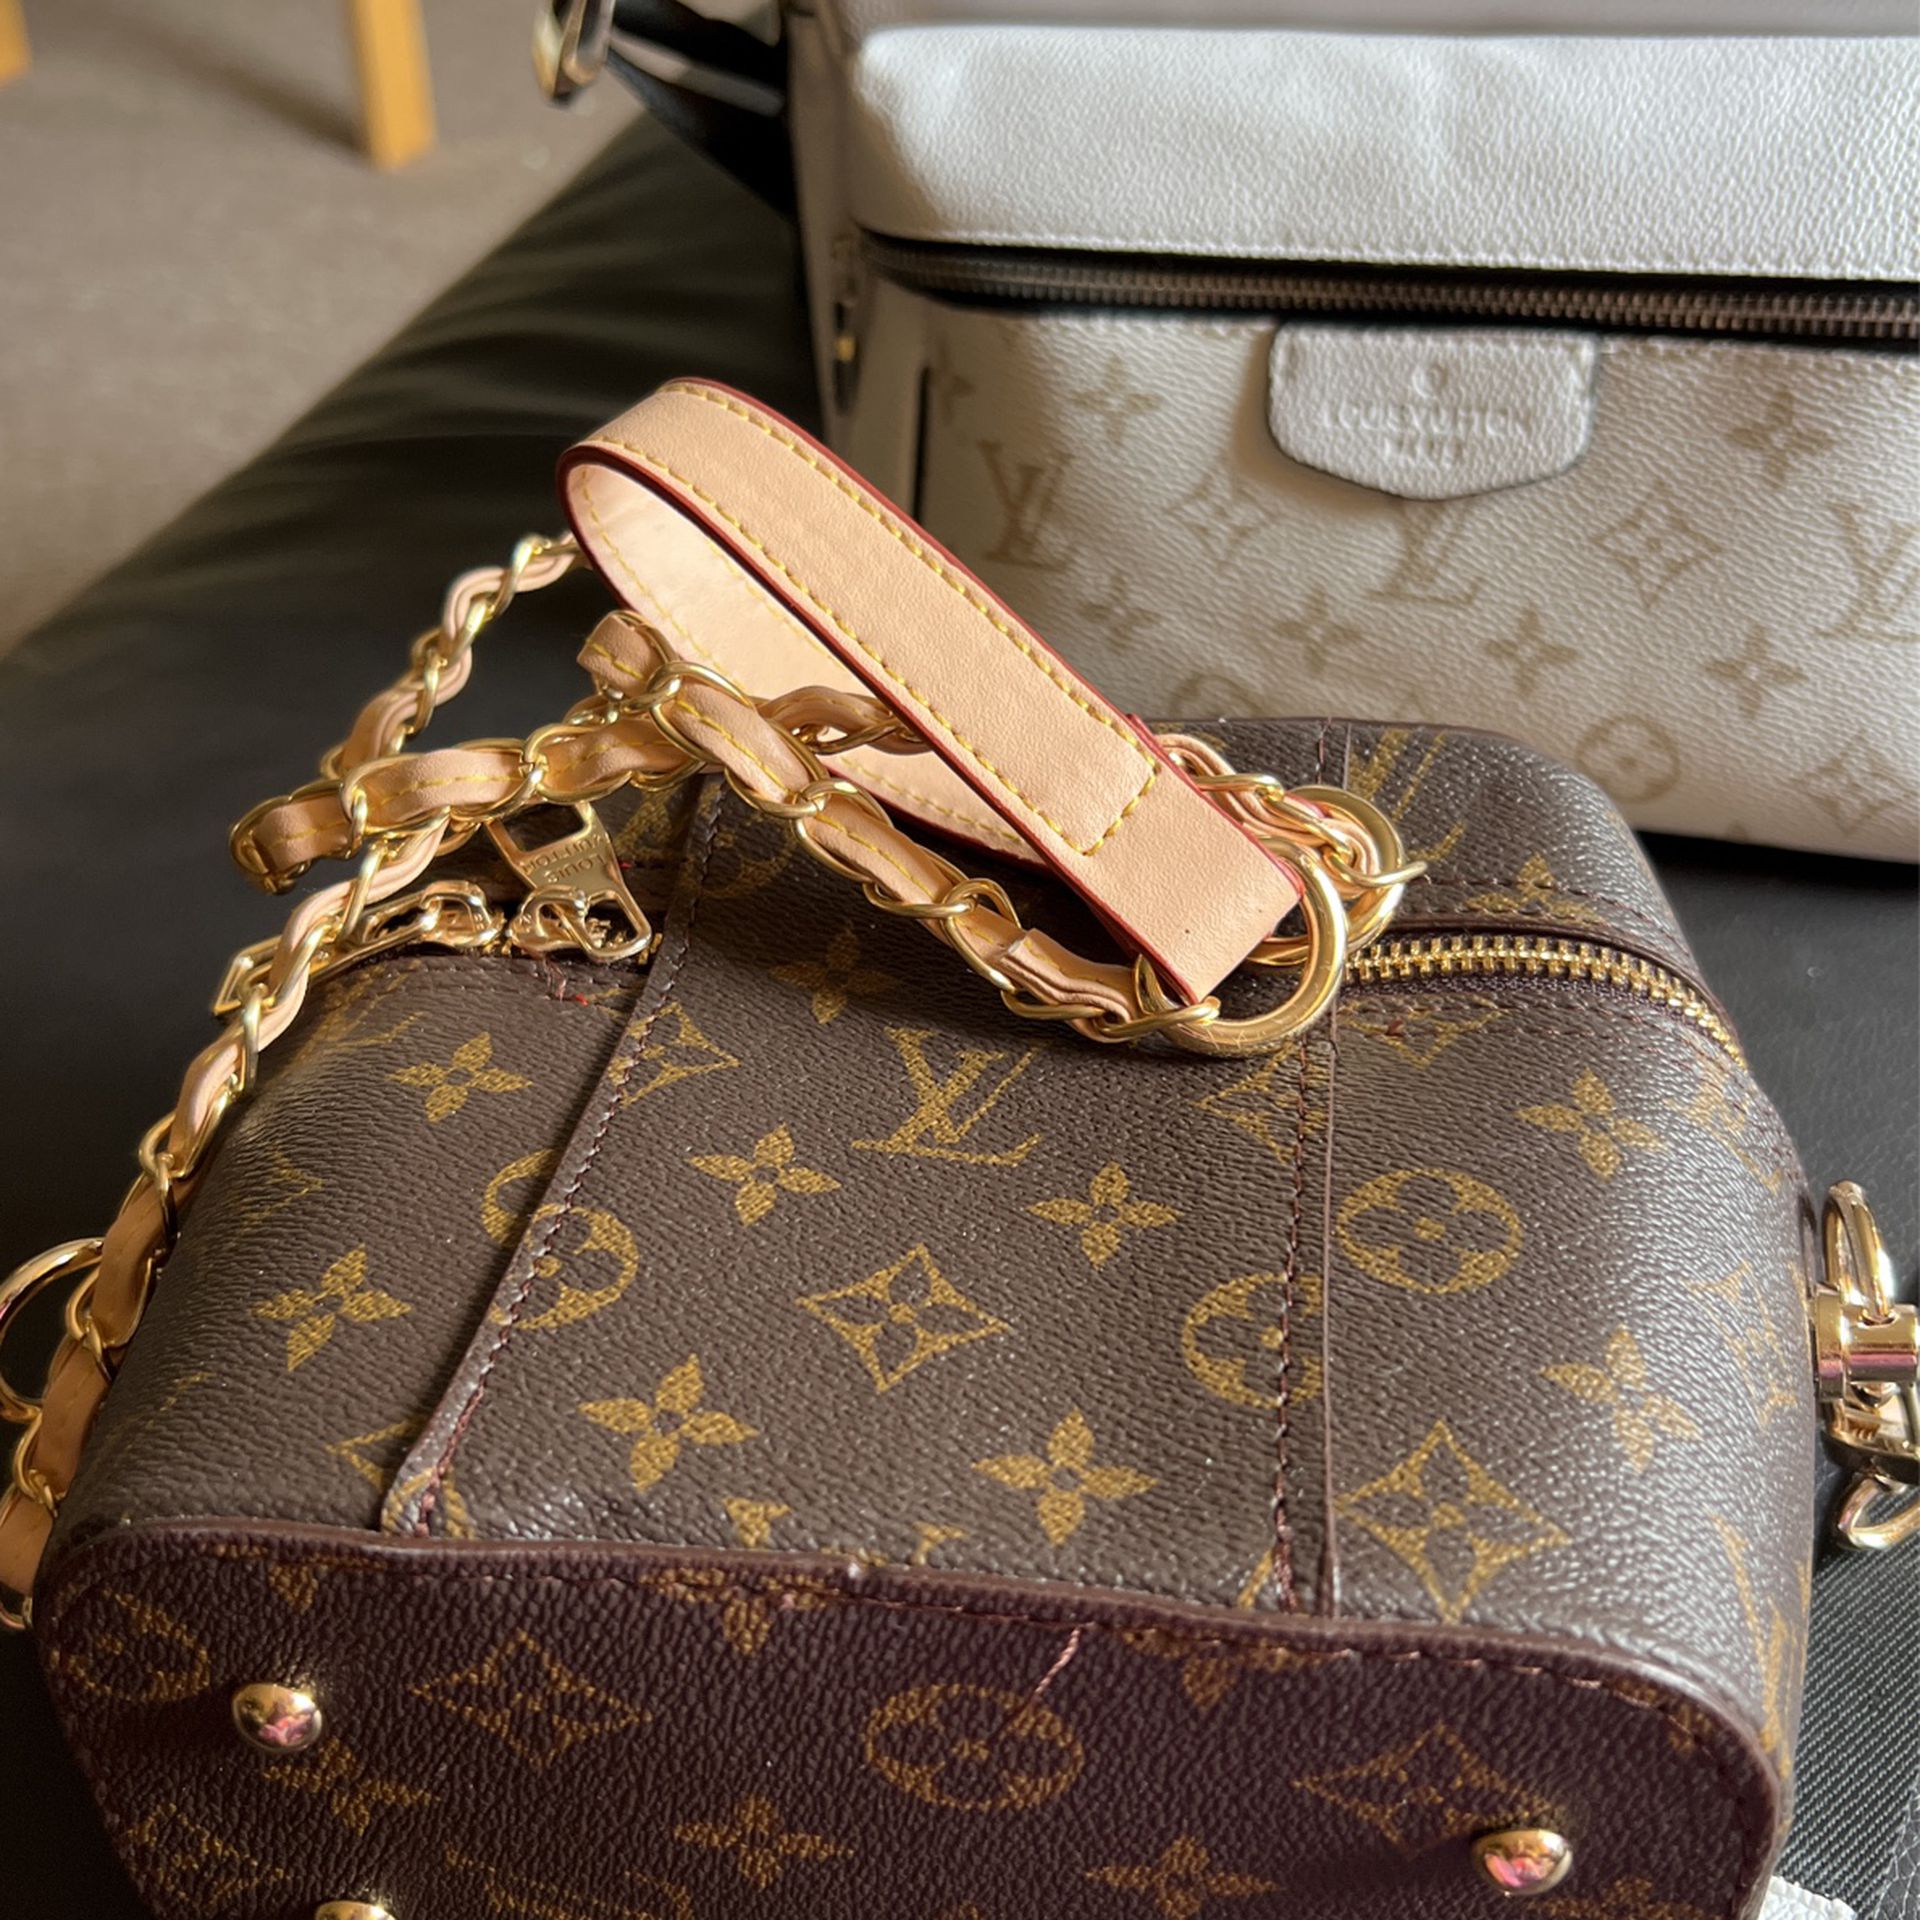 Louis Vuitton Bag for Sale in Medford, MA - OfferUp